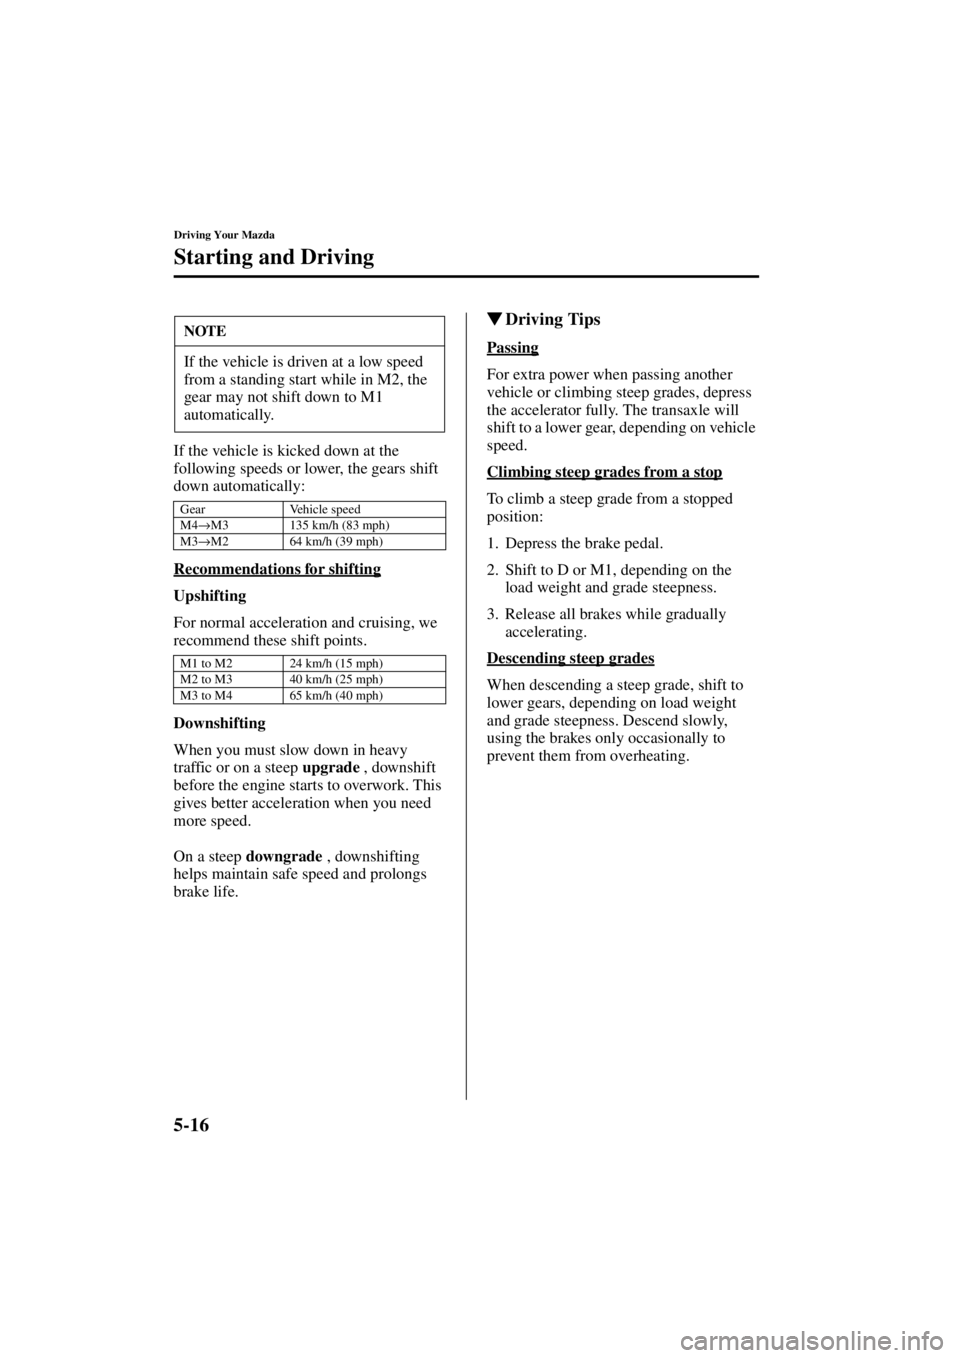 MAZDA MODEL 3 5-DOOR 2004 User Guide 5-16
Driving Your Mazda
Starting and Driving
Form No. 8S18-EA-03I
If the vehicle is kicked down at the 
following speeds or lower, the gears shift 
down automatically:
Recommendations for shifting
Ups